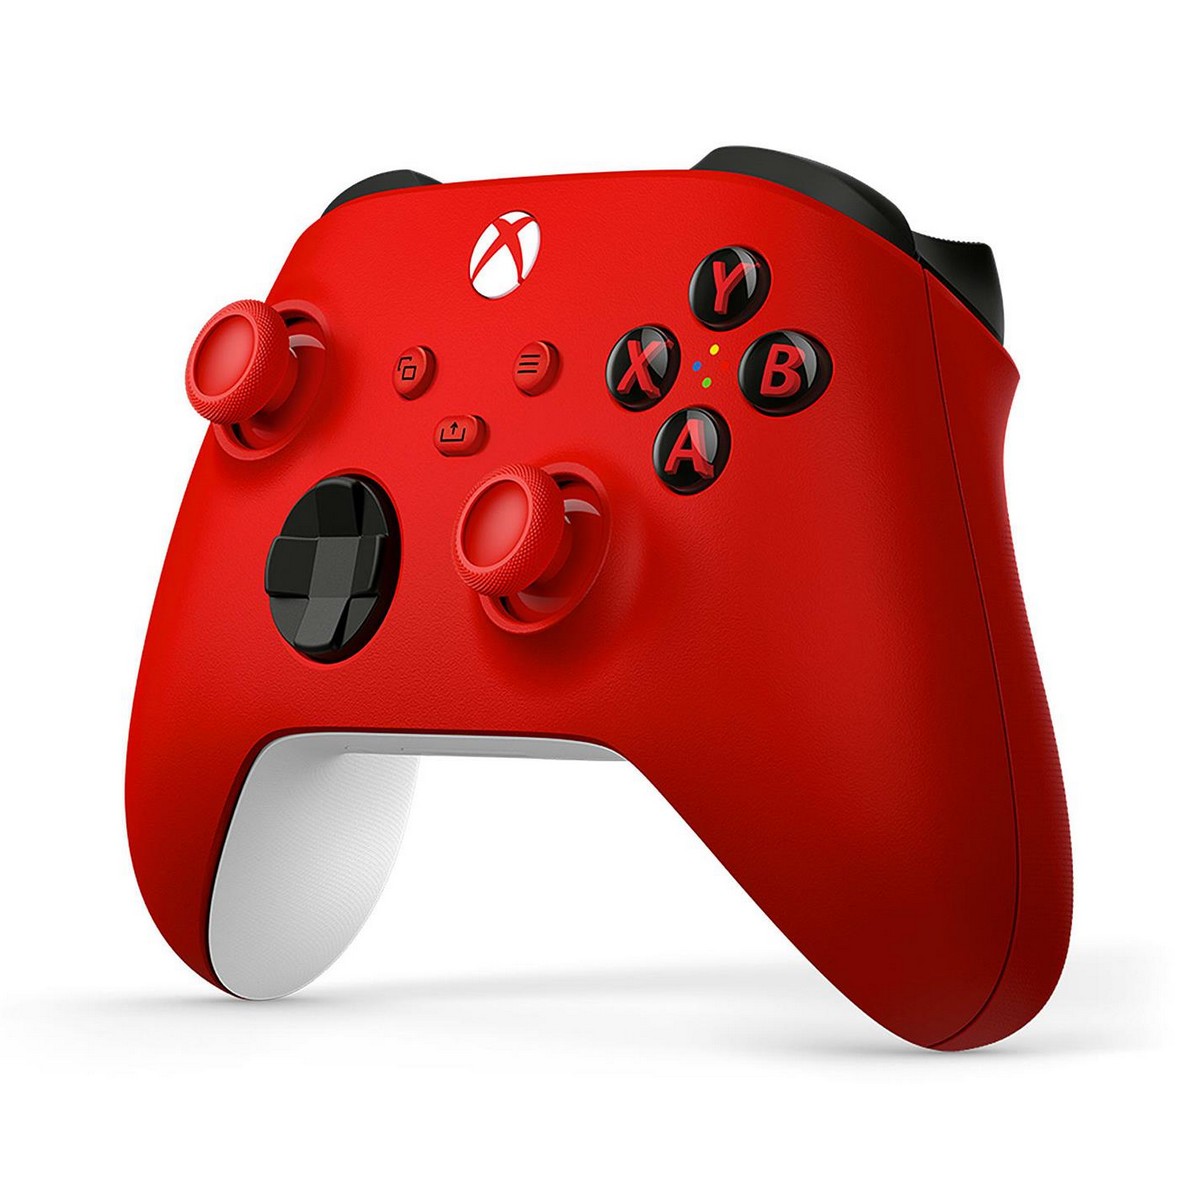 Microsoft Official Xbox Series X & S Wireless Controller - Red (XBOX/PC QAU-00012)